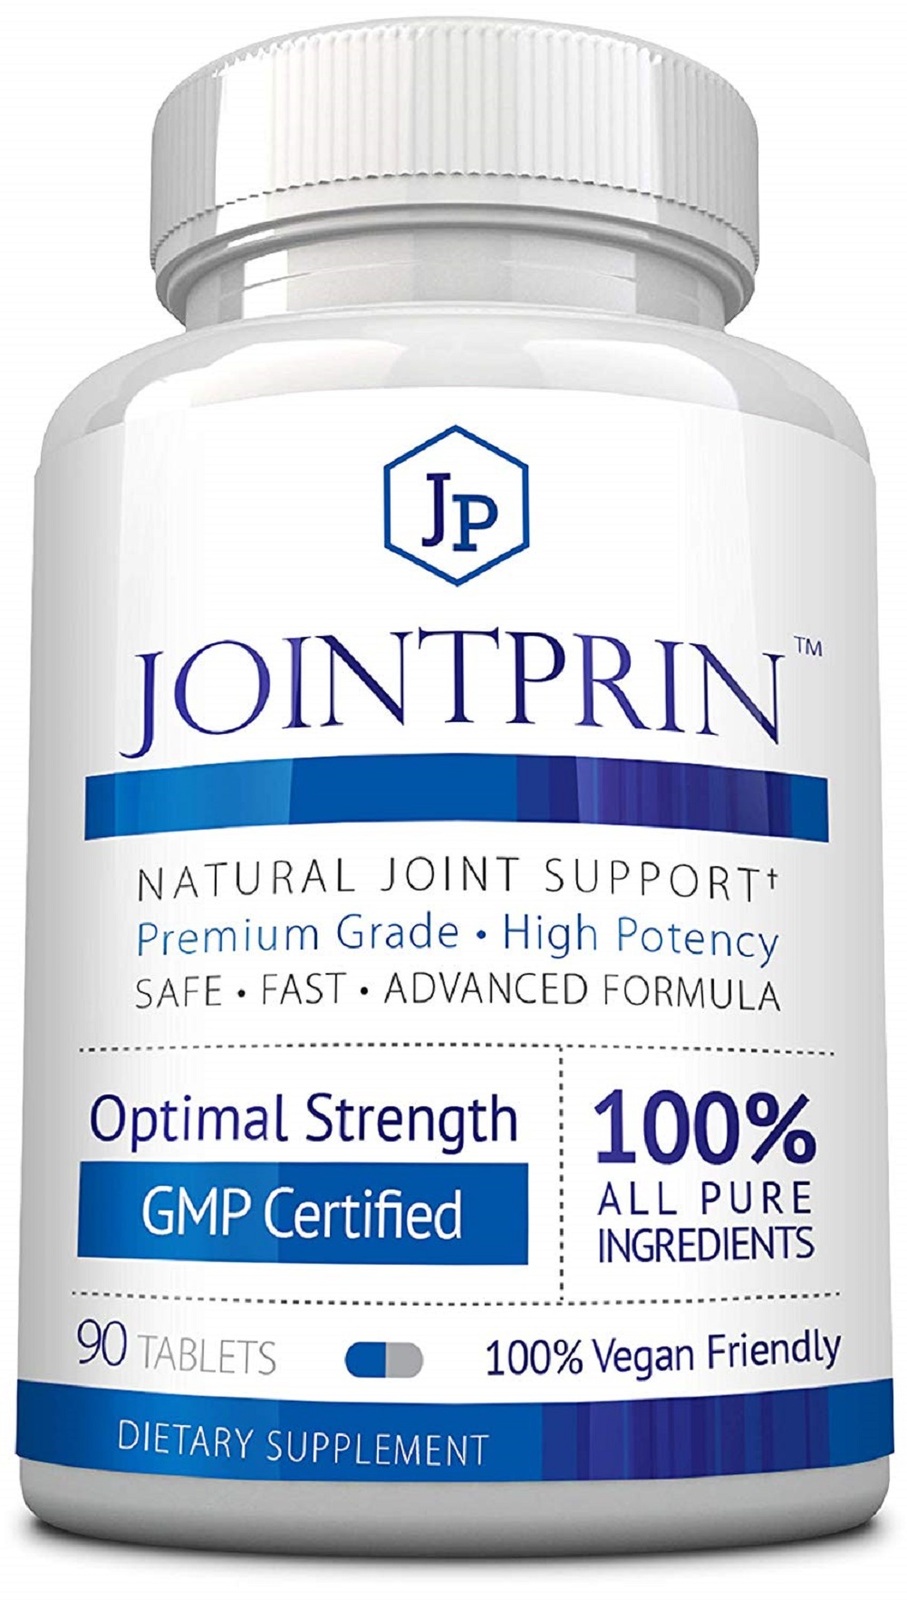 Jointprin - Natural Joint Support - 90 Tabs